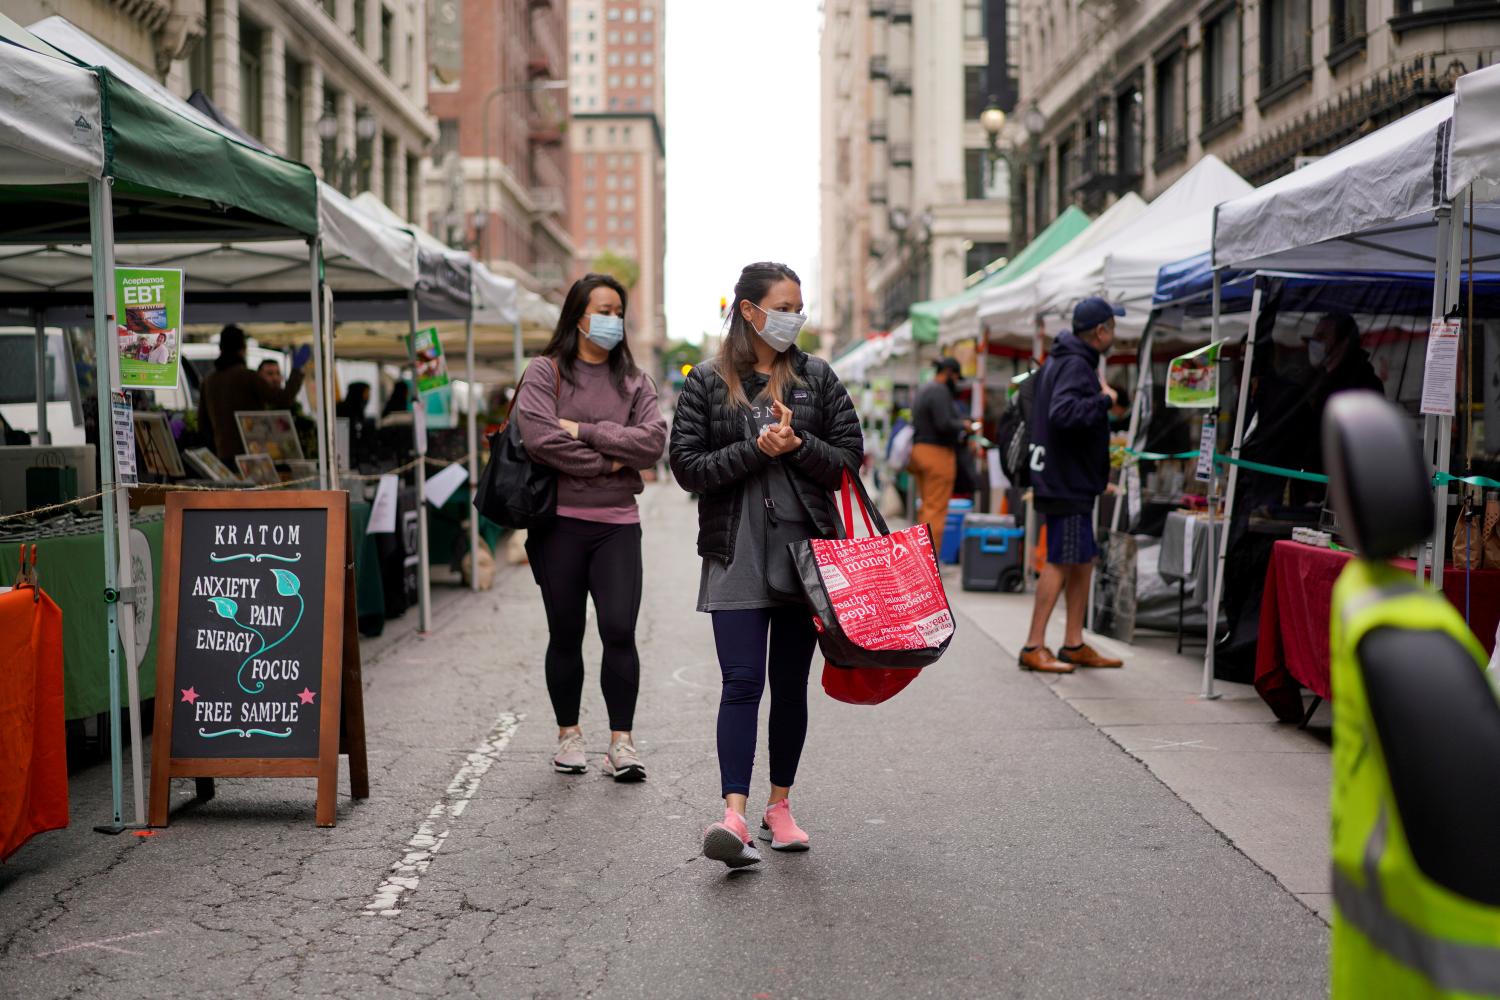 Shoppers wearing protective masks walk through the Historic Downtown Farmers Market during the outbreak of the coronavirus disease (COVID-19) in Los Angeles, California, U.S., April 5, 2020.      REUTERS/Kyle Grillot